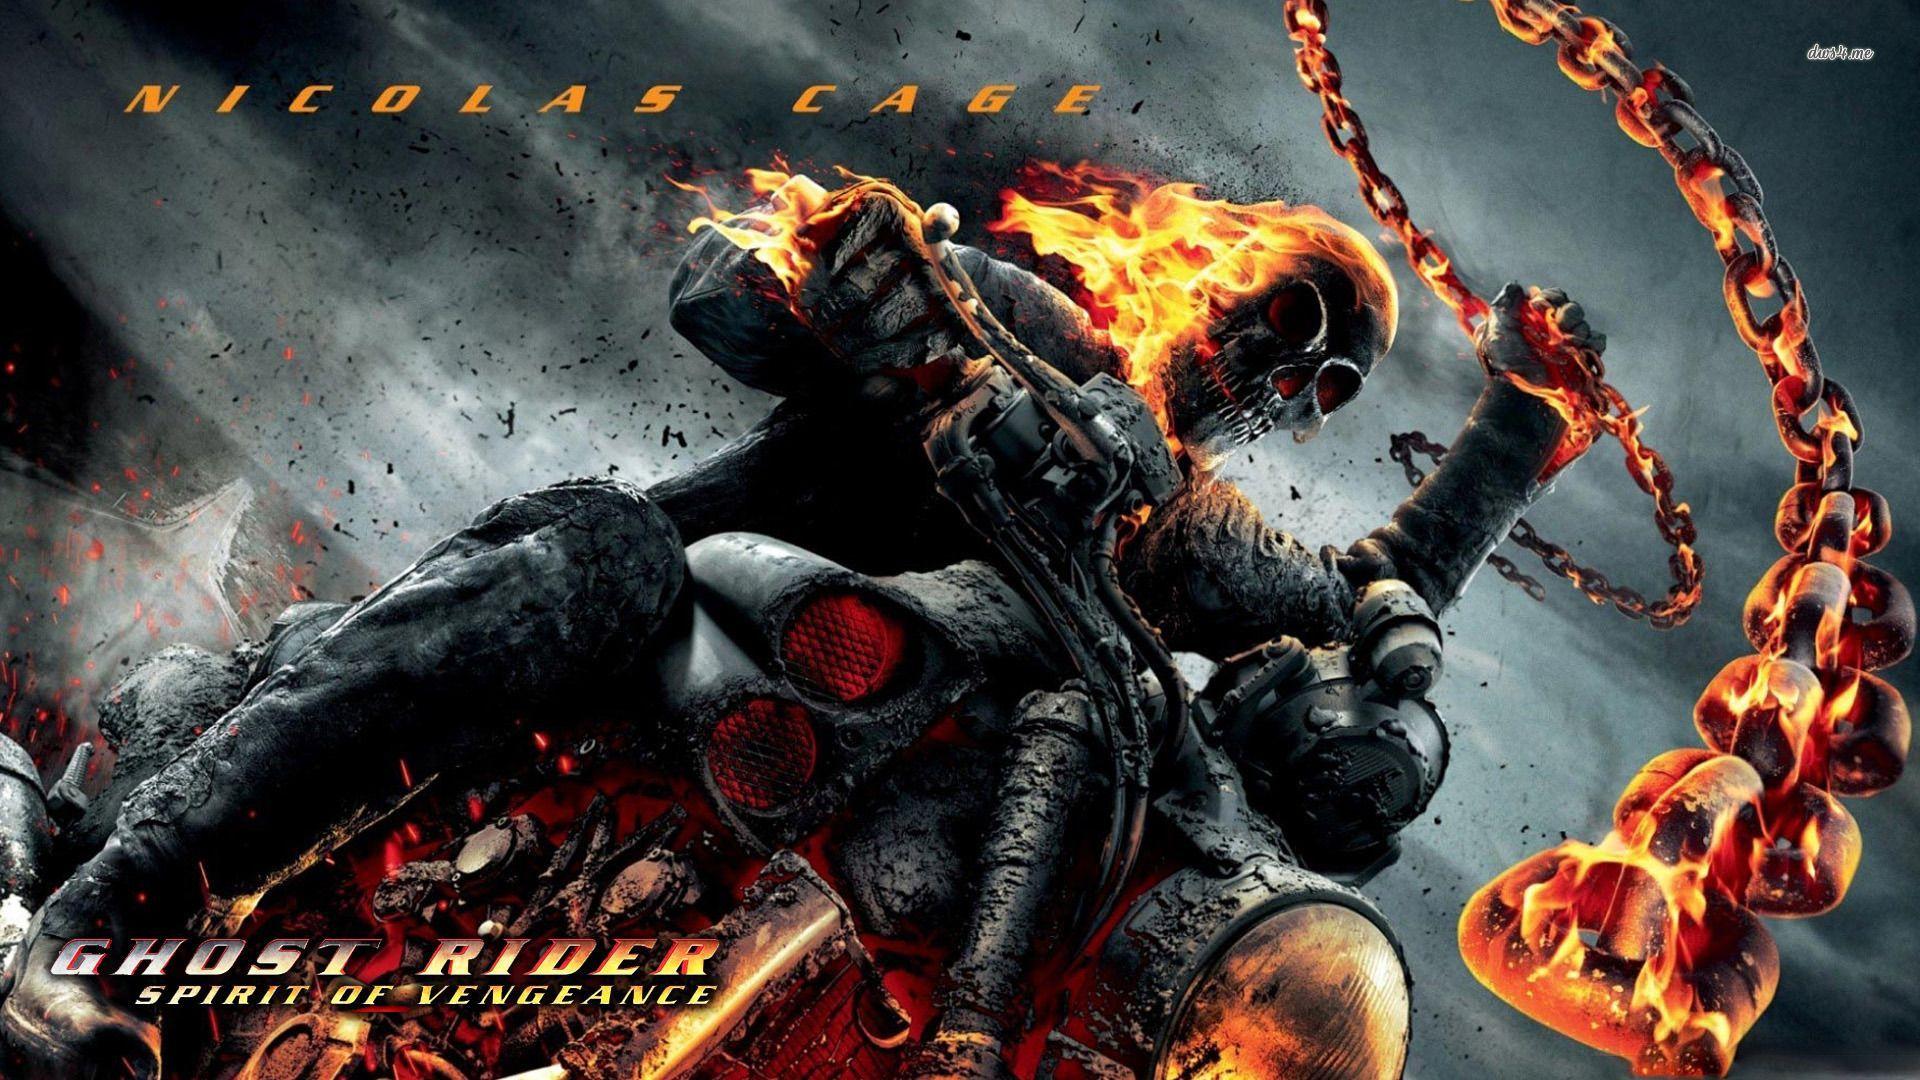 Ghost Rider Photos – Ghost Rider Wallpapers for desk 4K and mobile